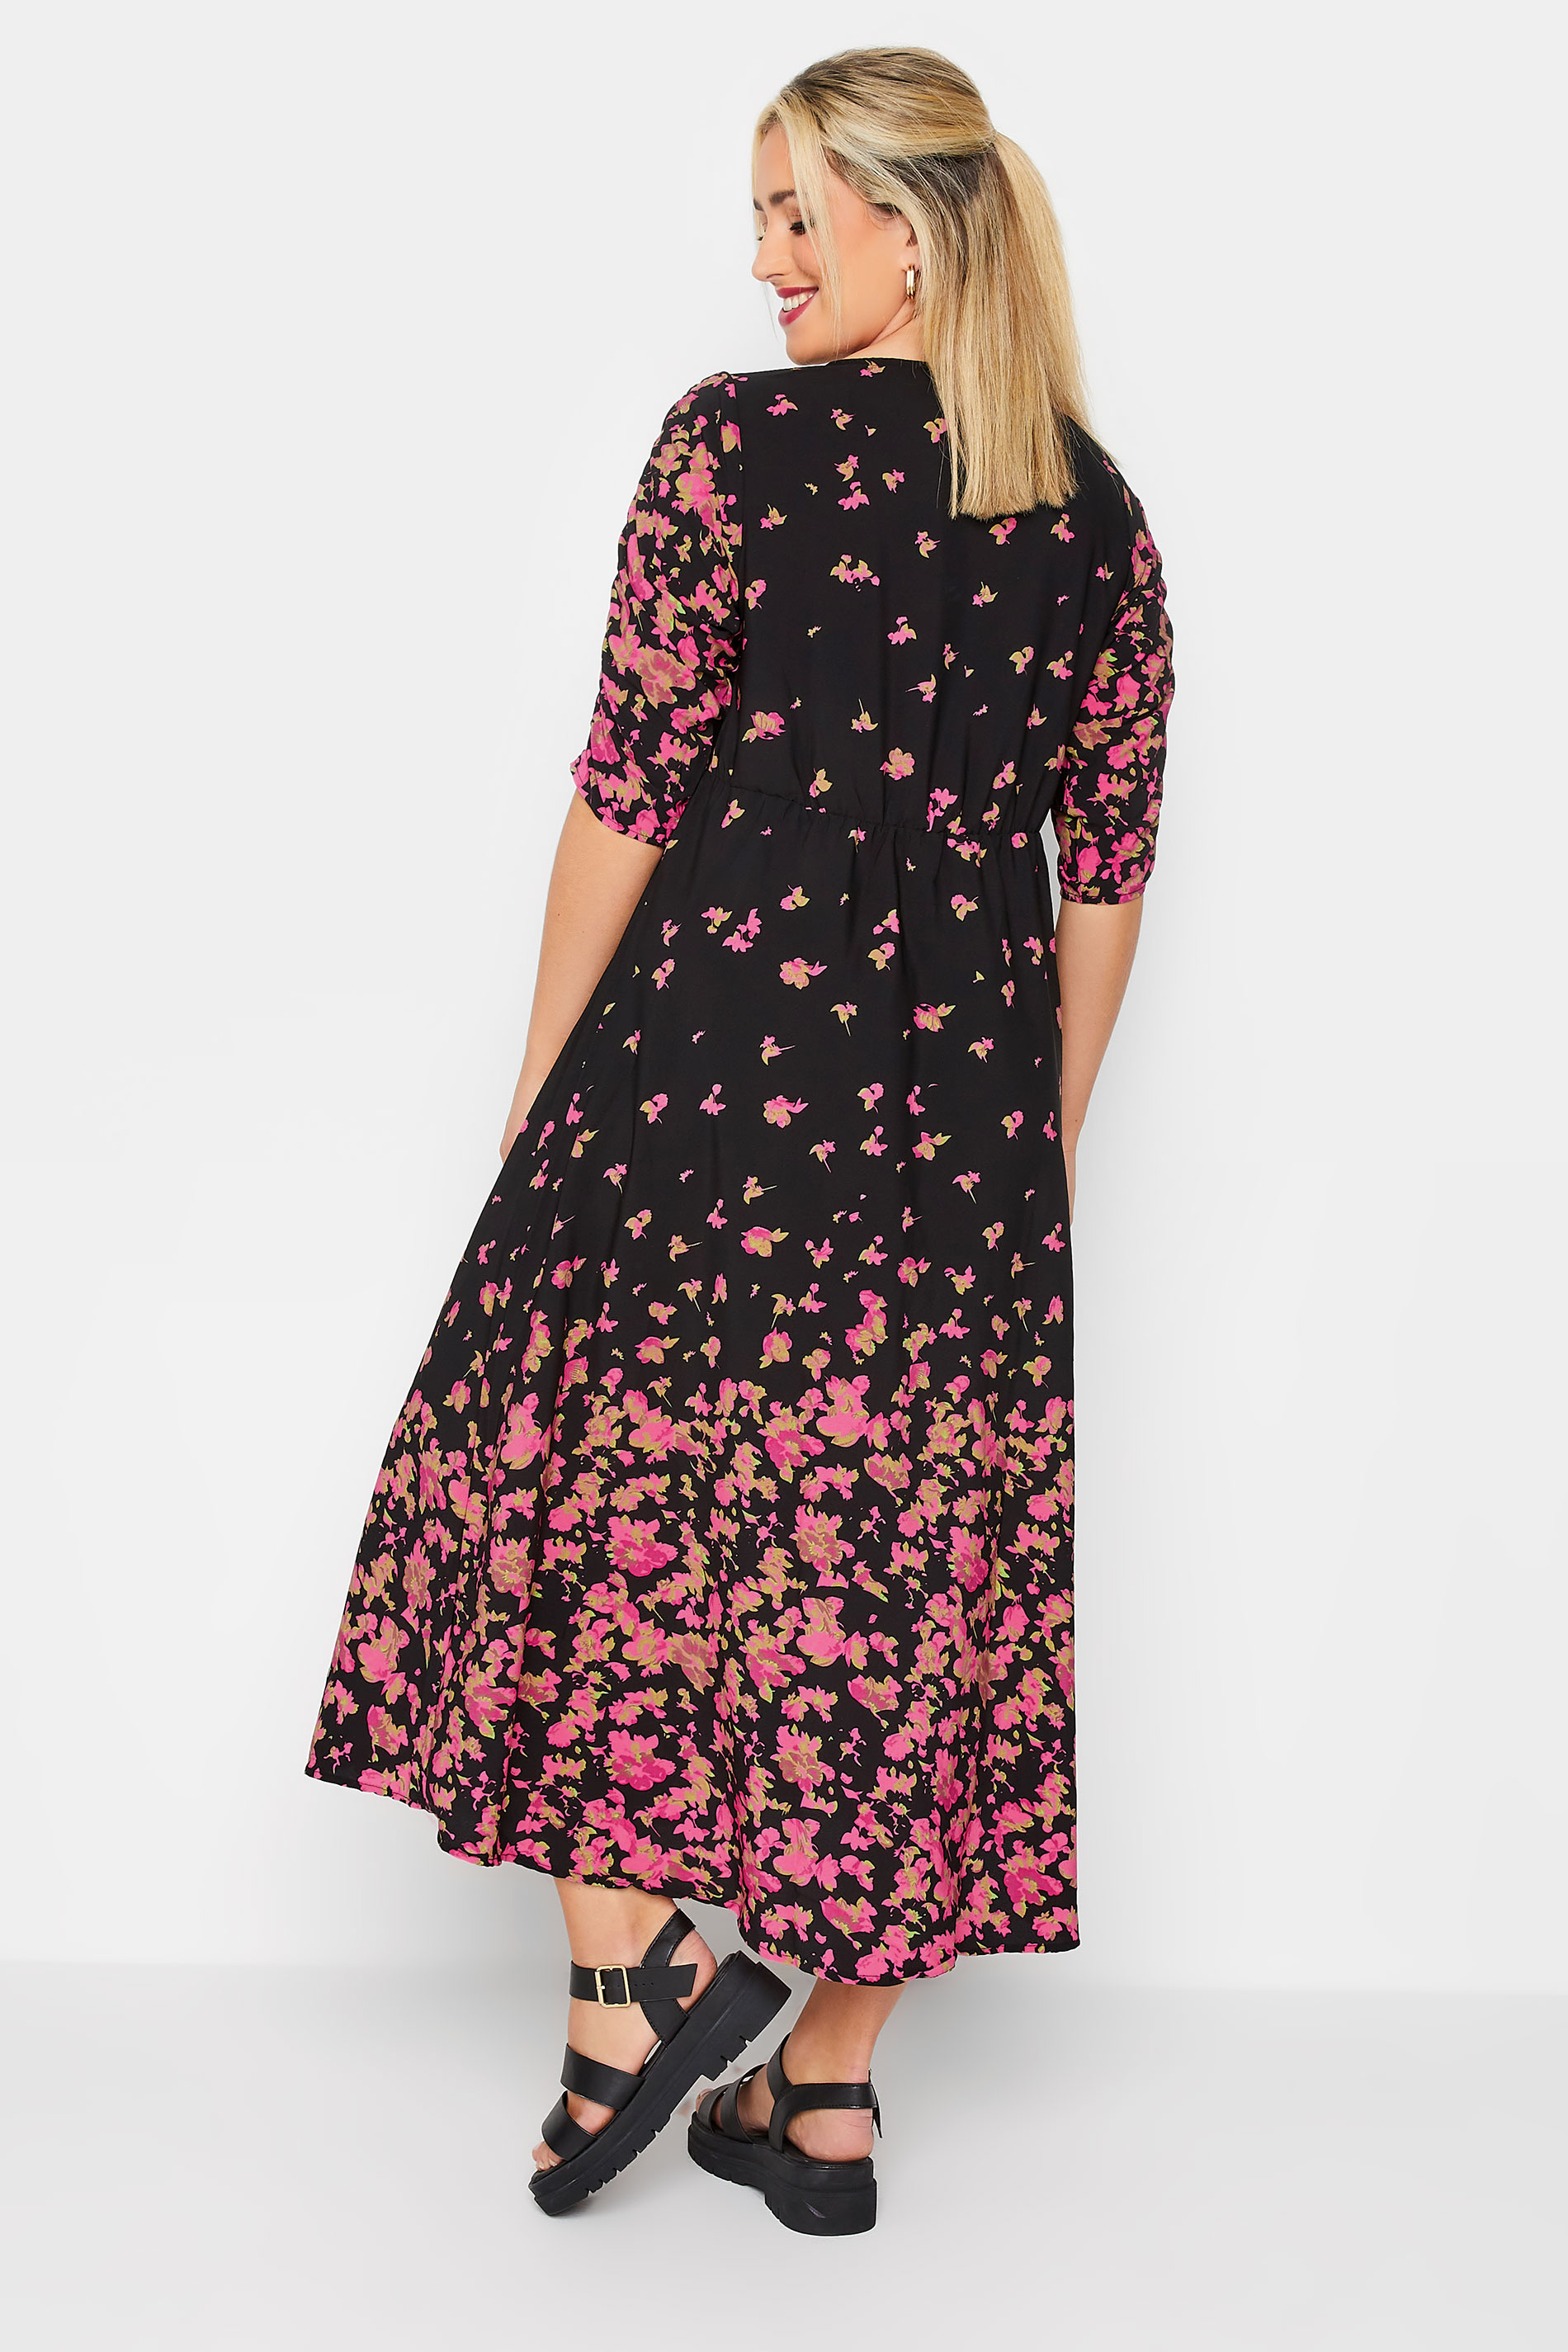 LIMITED COLLECTION Plus Size Black & Pink Floral Tea Dress | Yours Clothing 3